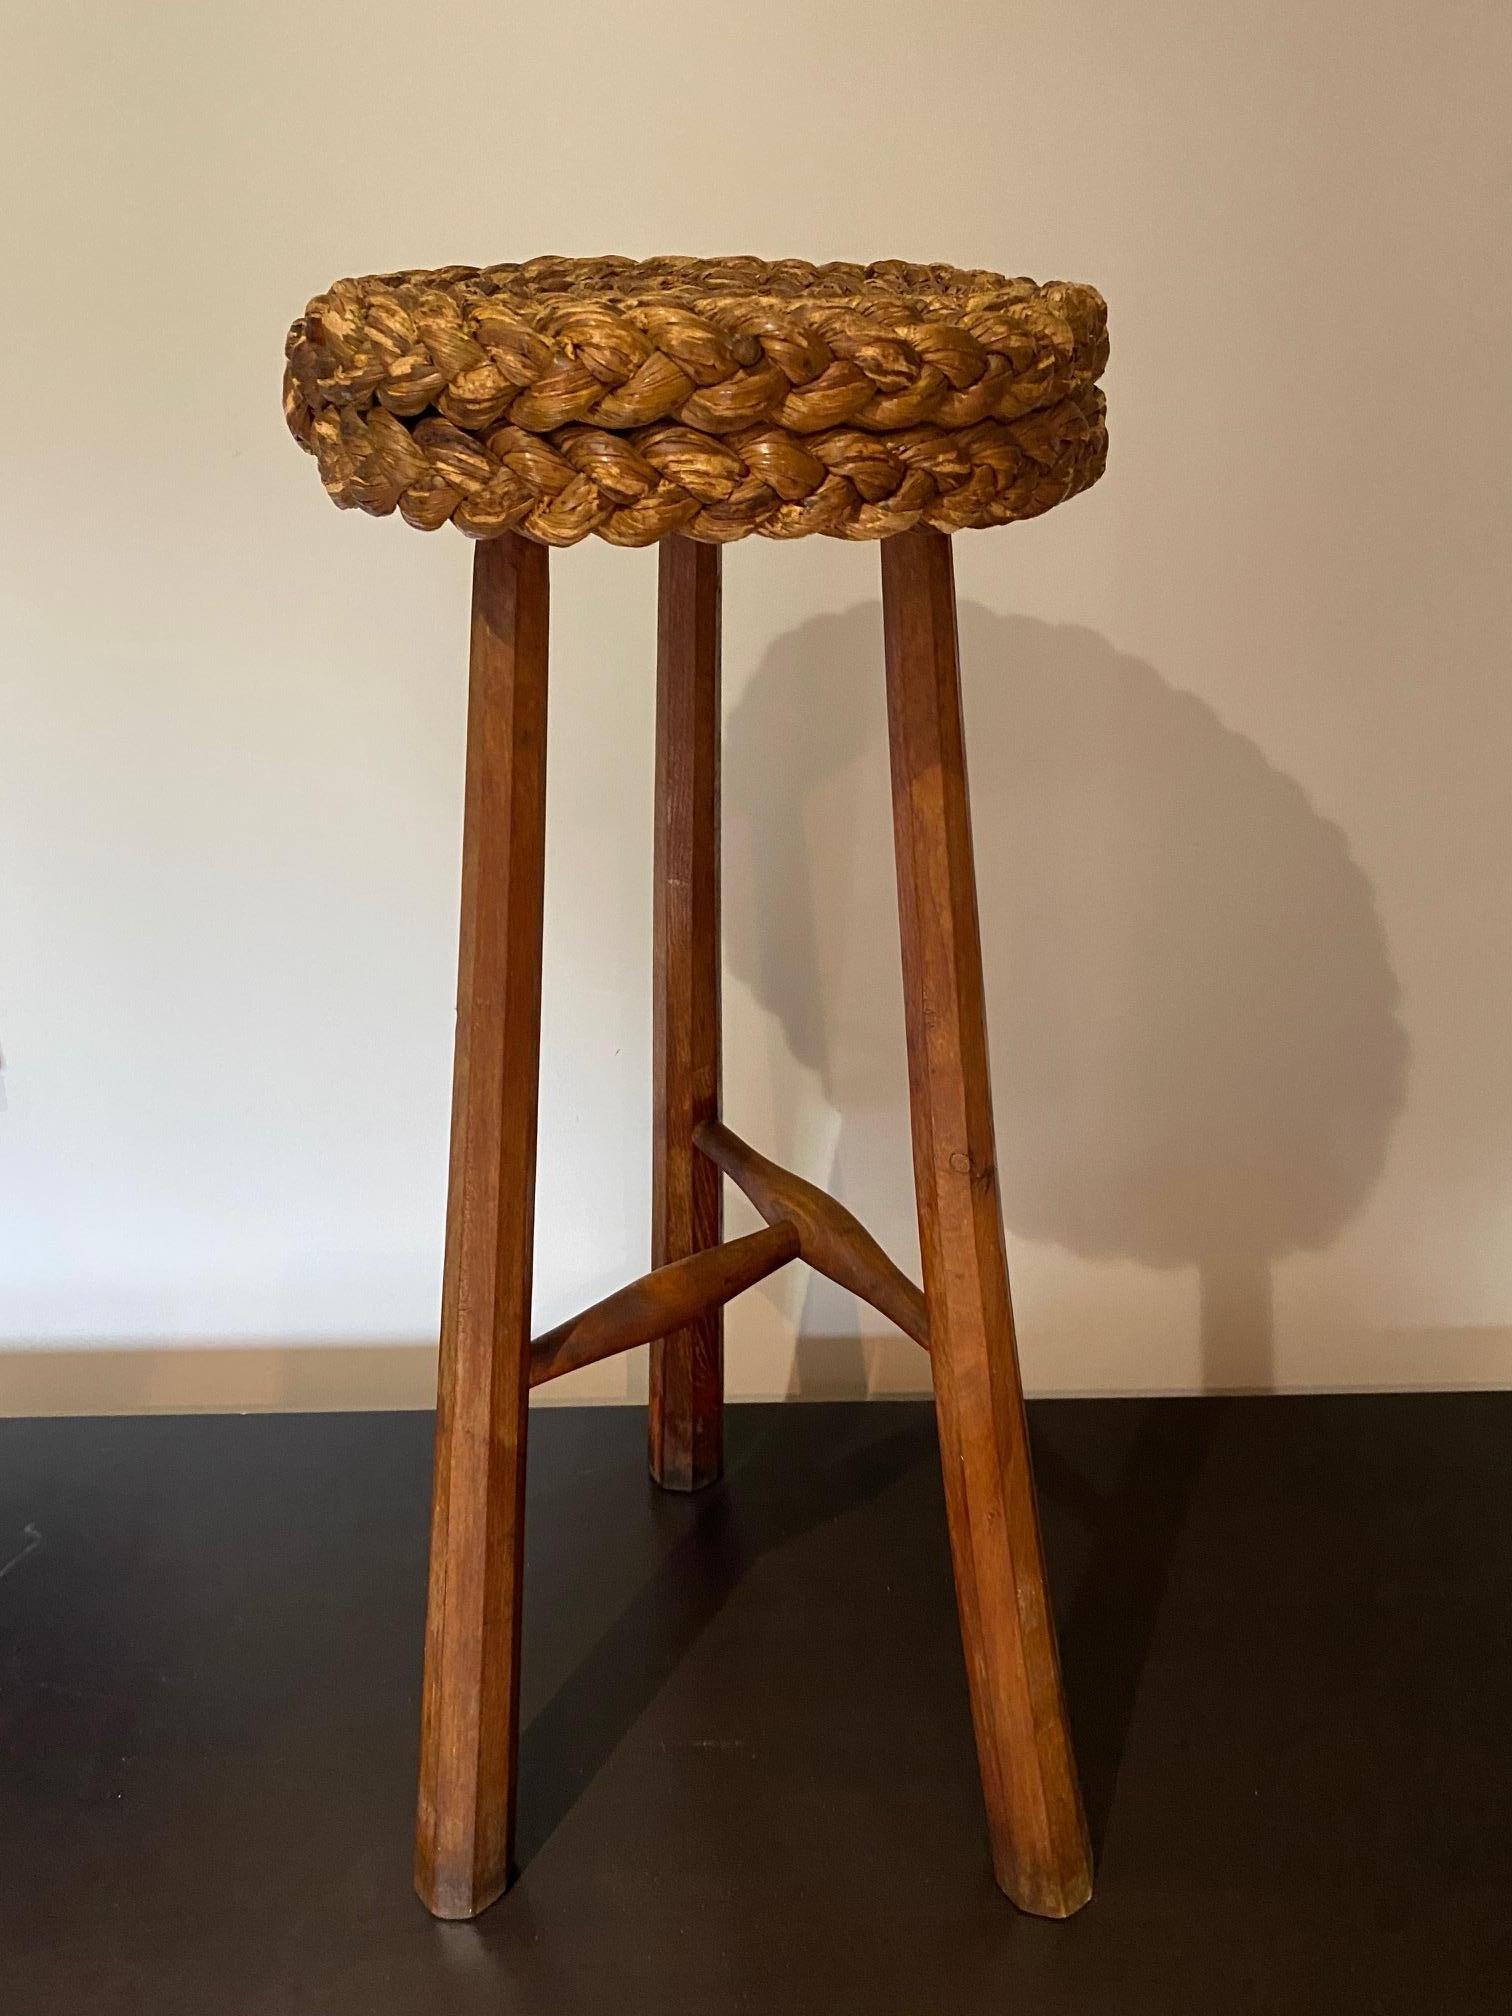 Bar stools in the style of Adrien Audoux and Frida Minet in tinted beech and woven raffia. This natural style is typical of French design in the style of Audoux-Minet established in Marseille.
Beautiful patina
Height: 80cm
Foot width: 40 cm
Seat